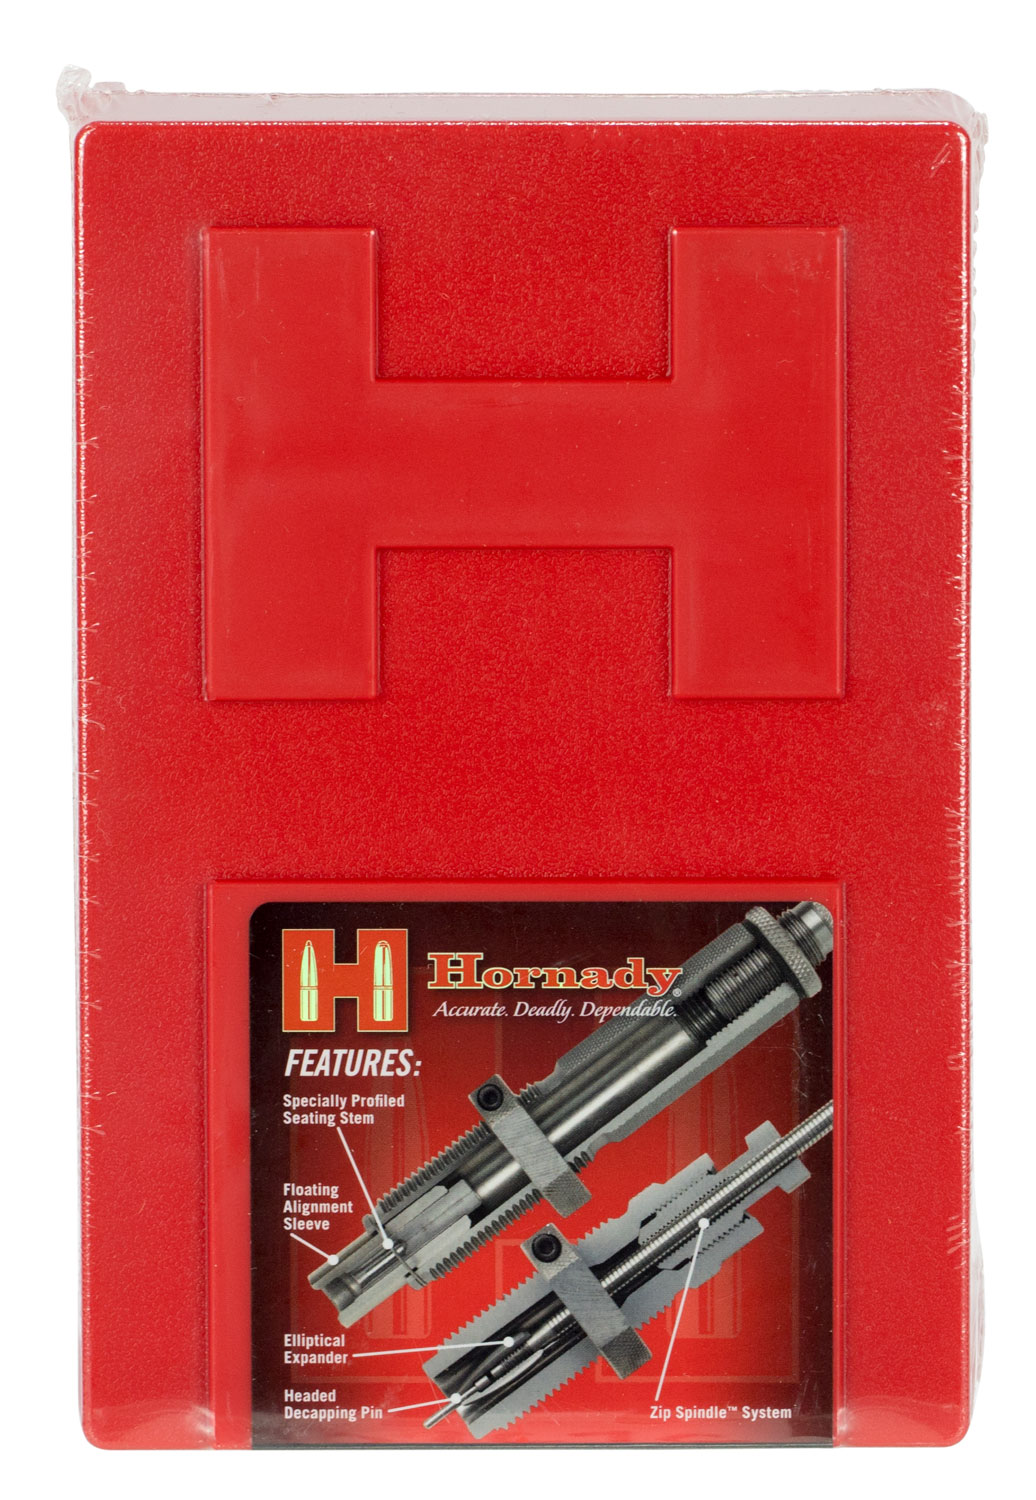 Hornady 546449 Custom Grade Series IV 2-Die Set for 375 Flanged Mag Nitro Express Includes Sizing/Seater